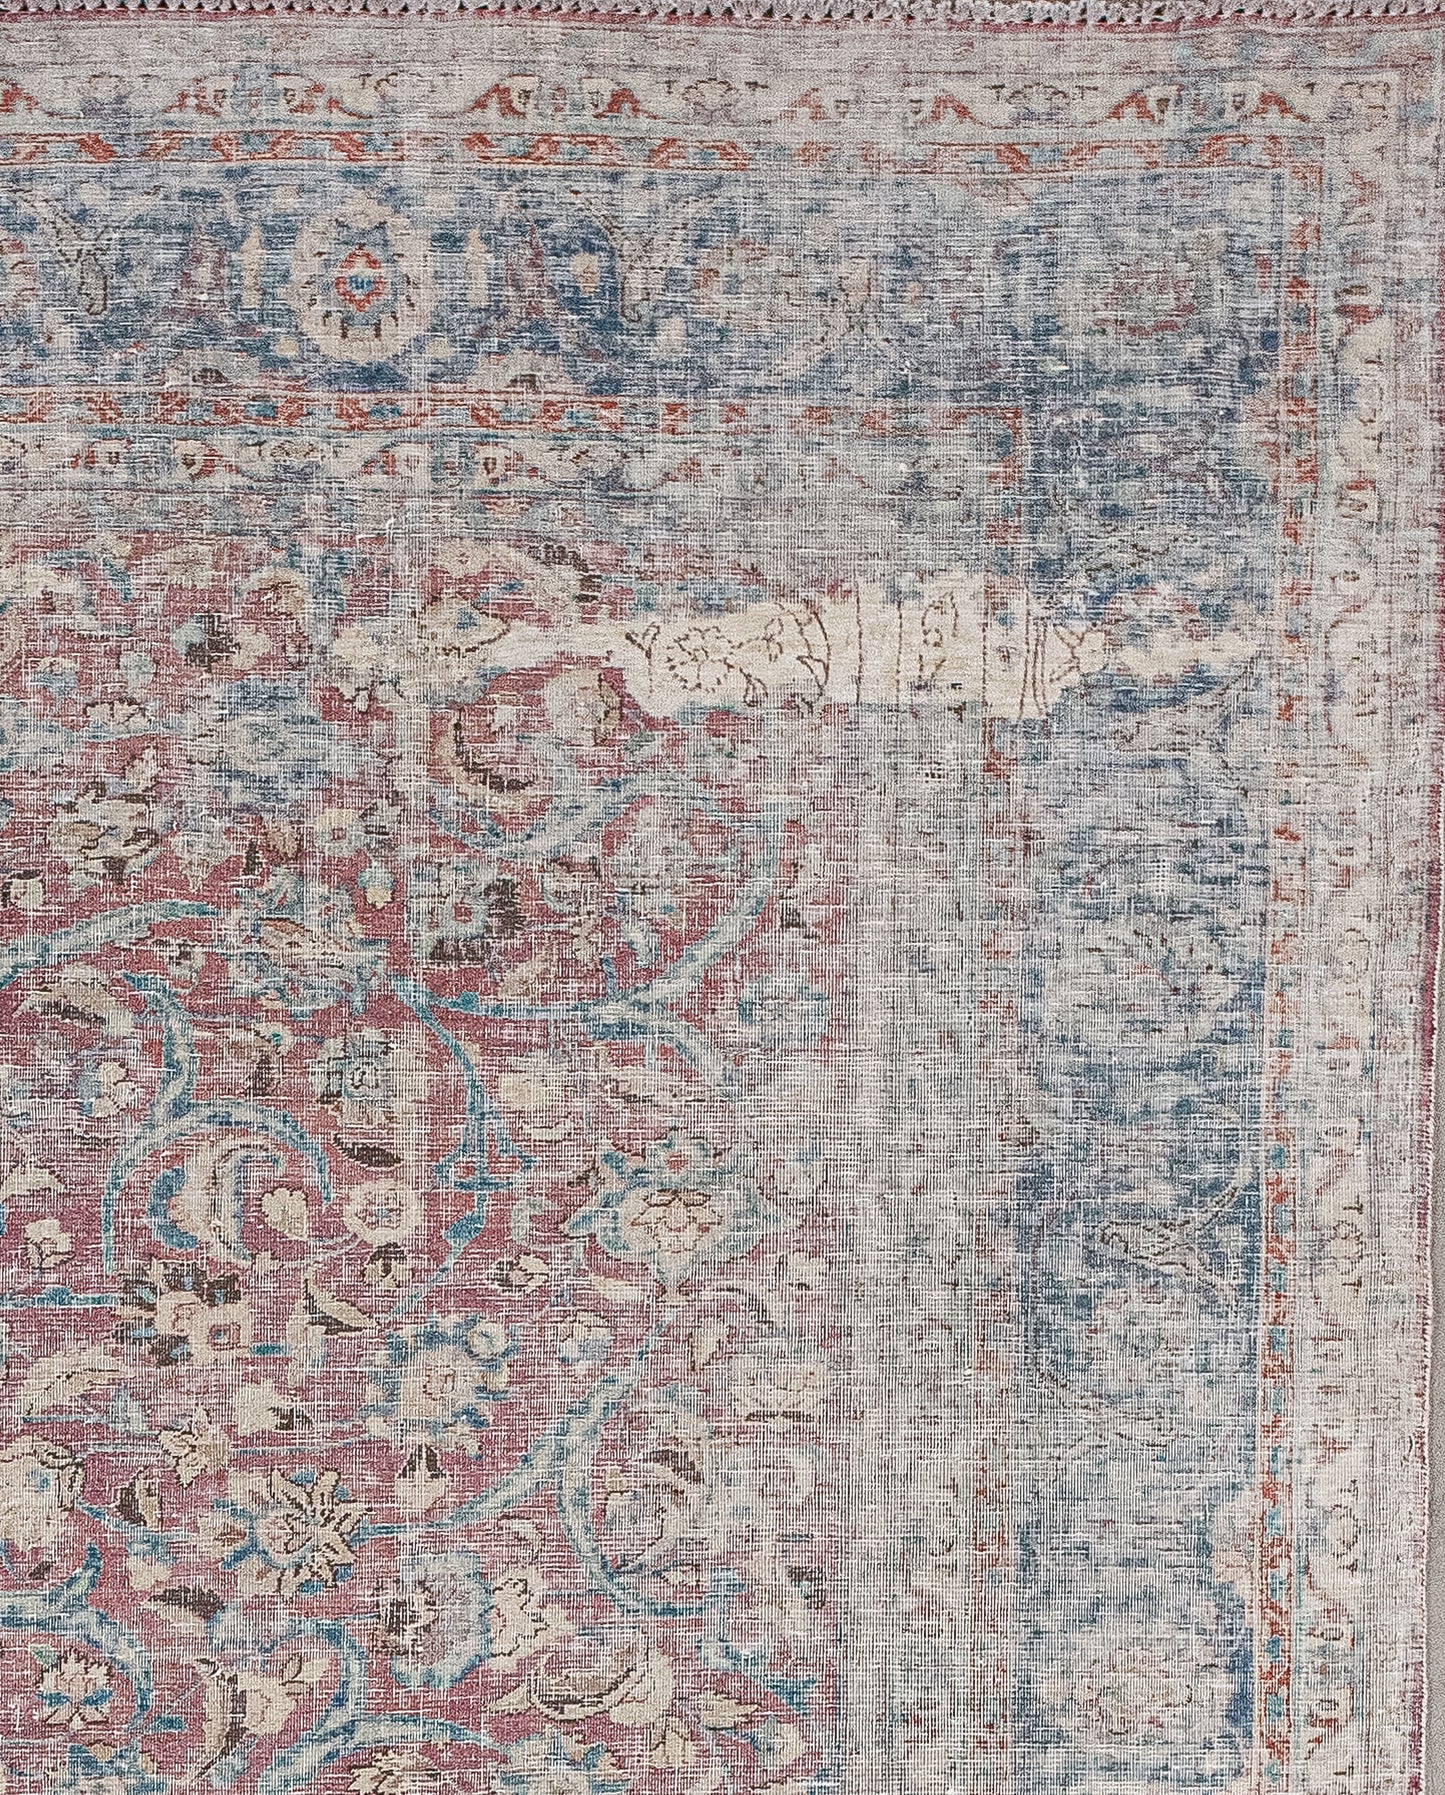 In addition, this rug is covered in a distressed-look finish that makes it very pleasant.